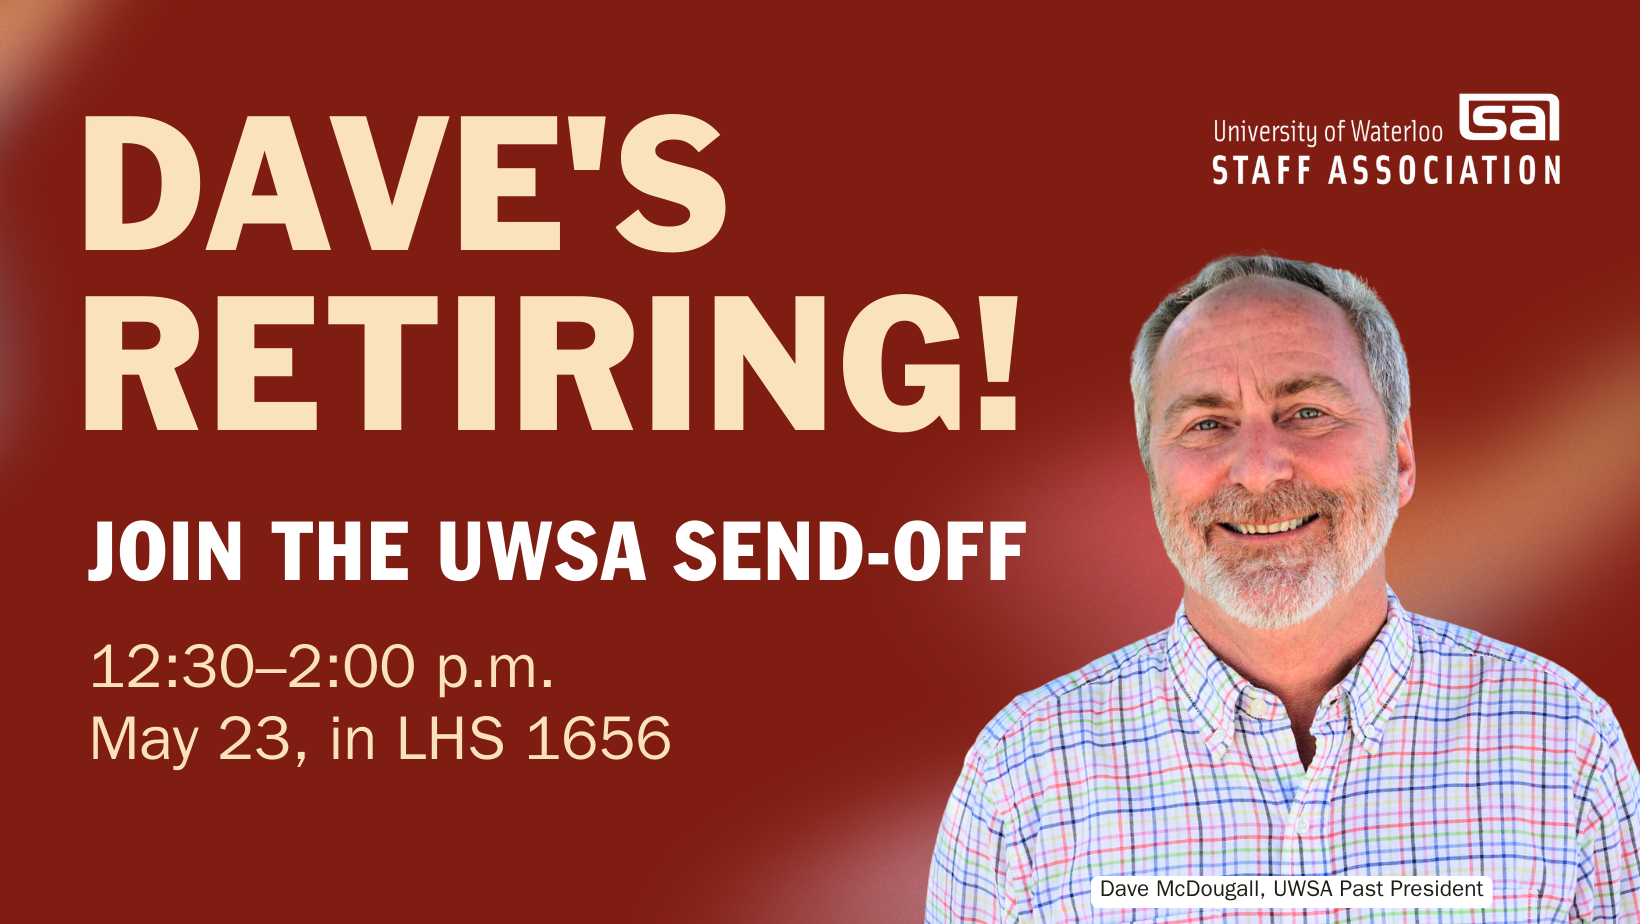 Dave's retiring! Join the UWSA send-off